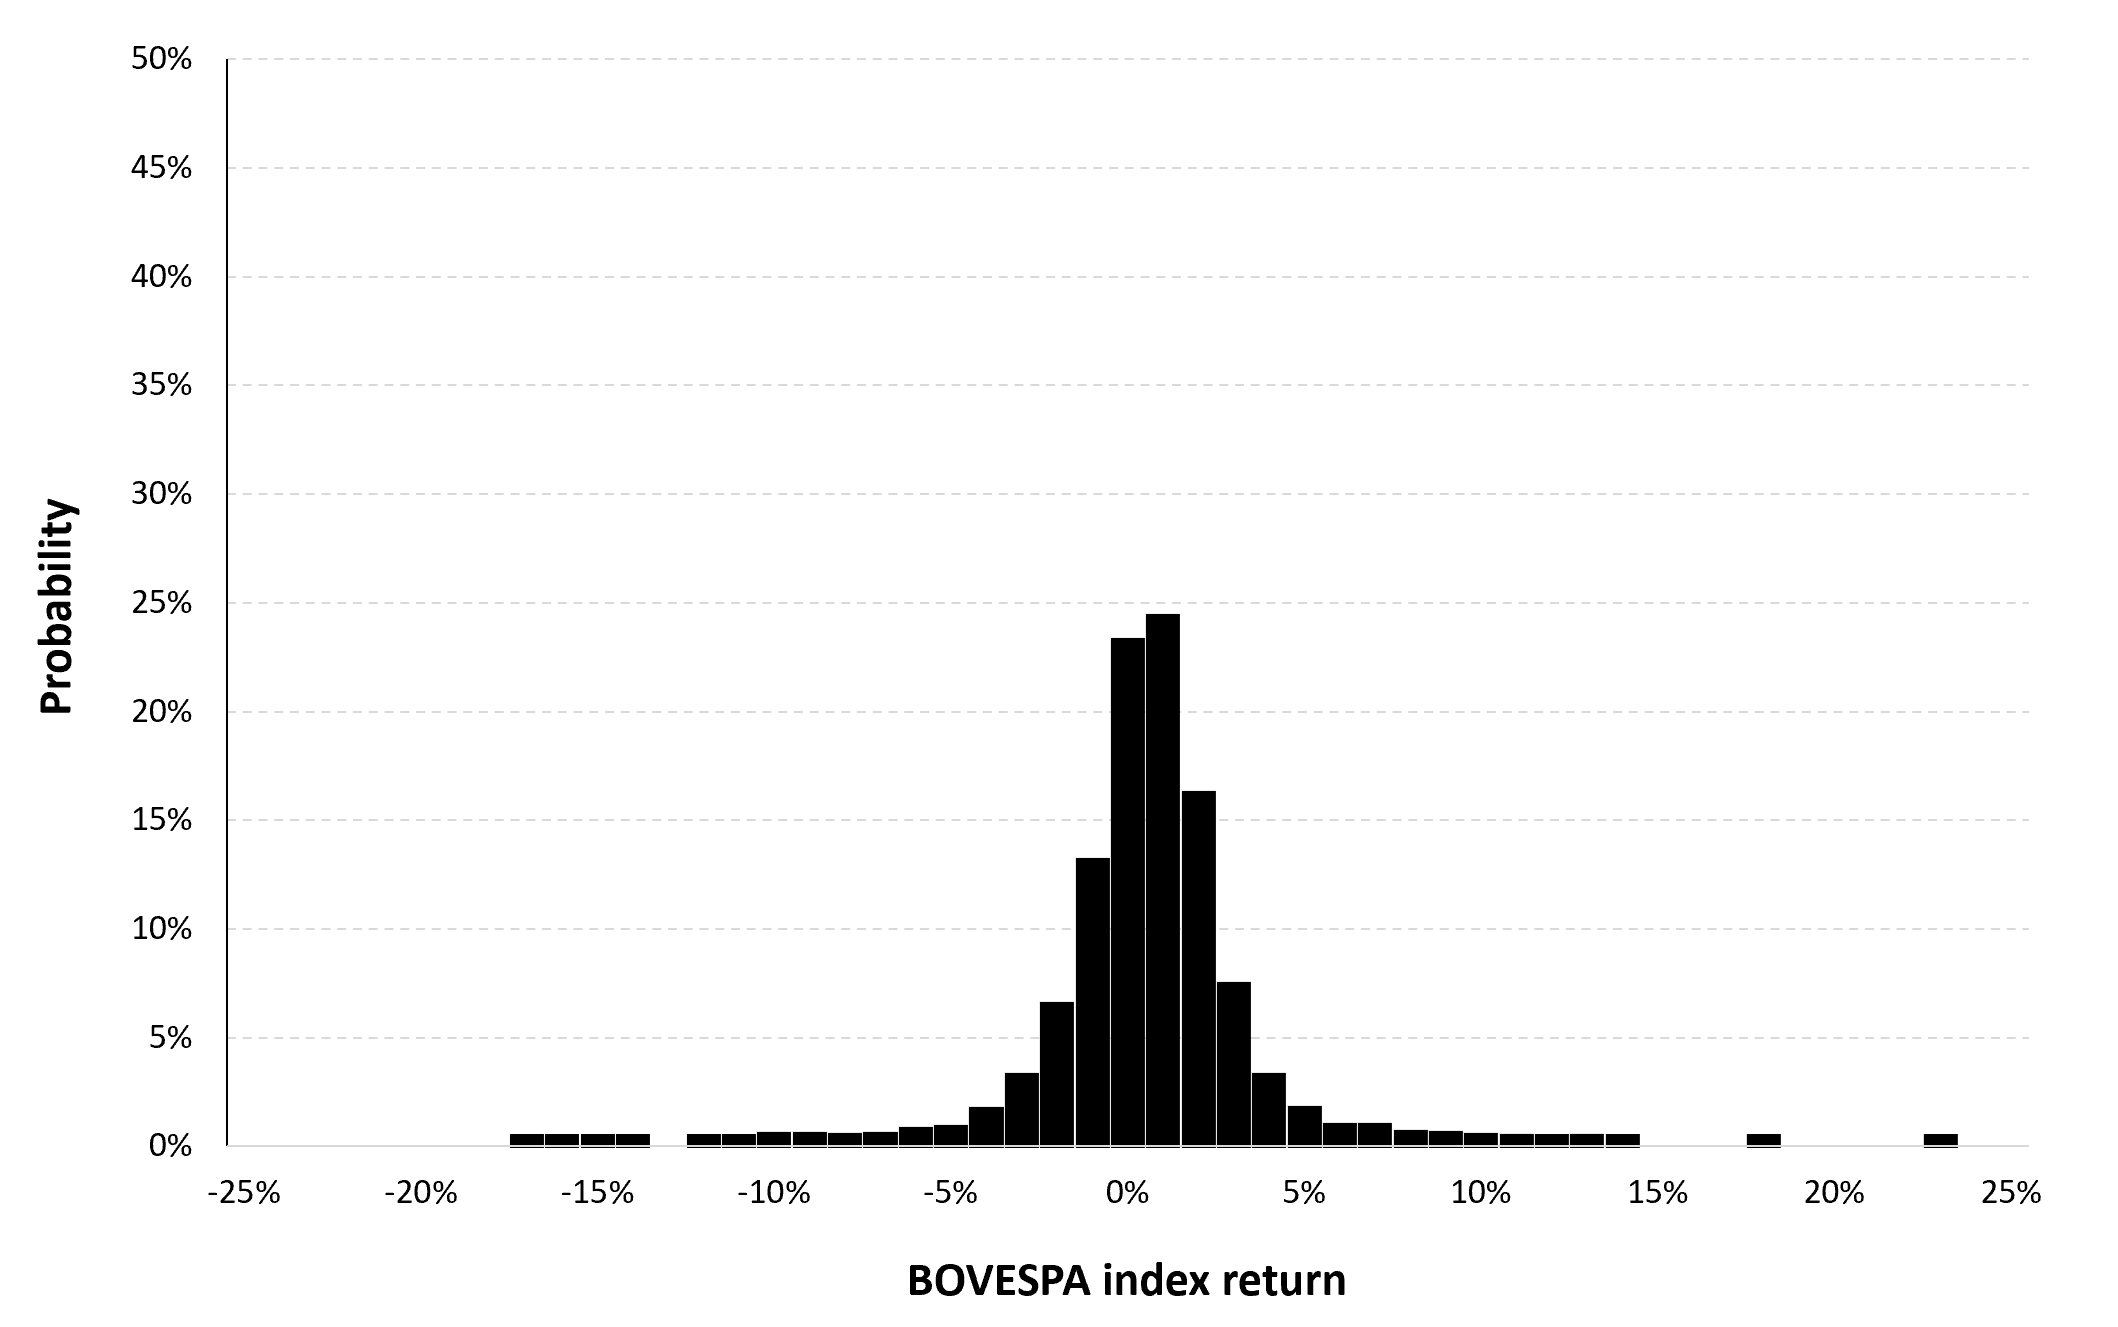 Historical distribution of the daily BOVESPA index returns